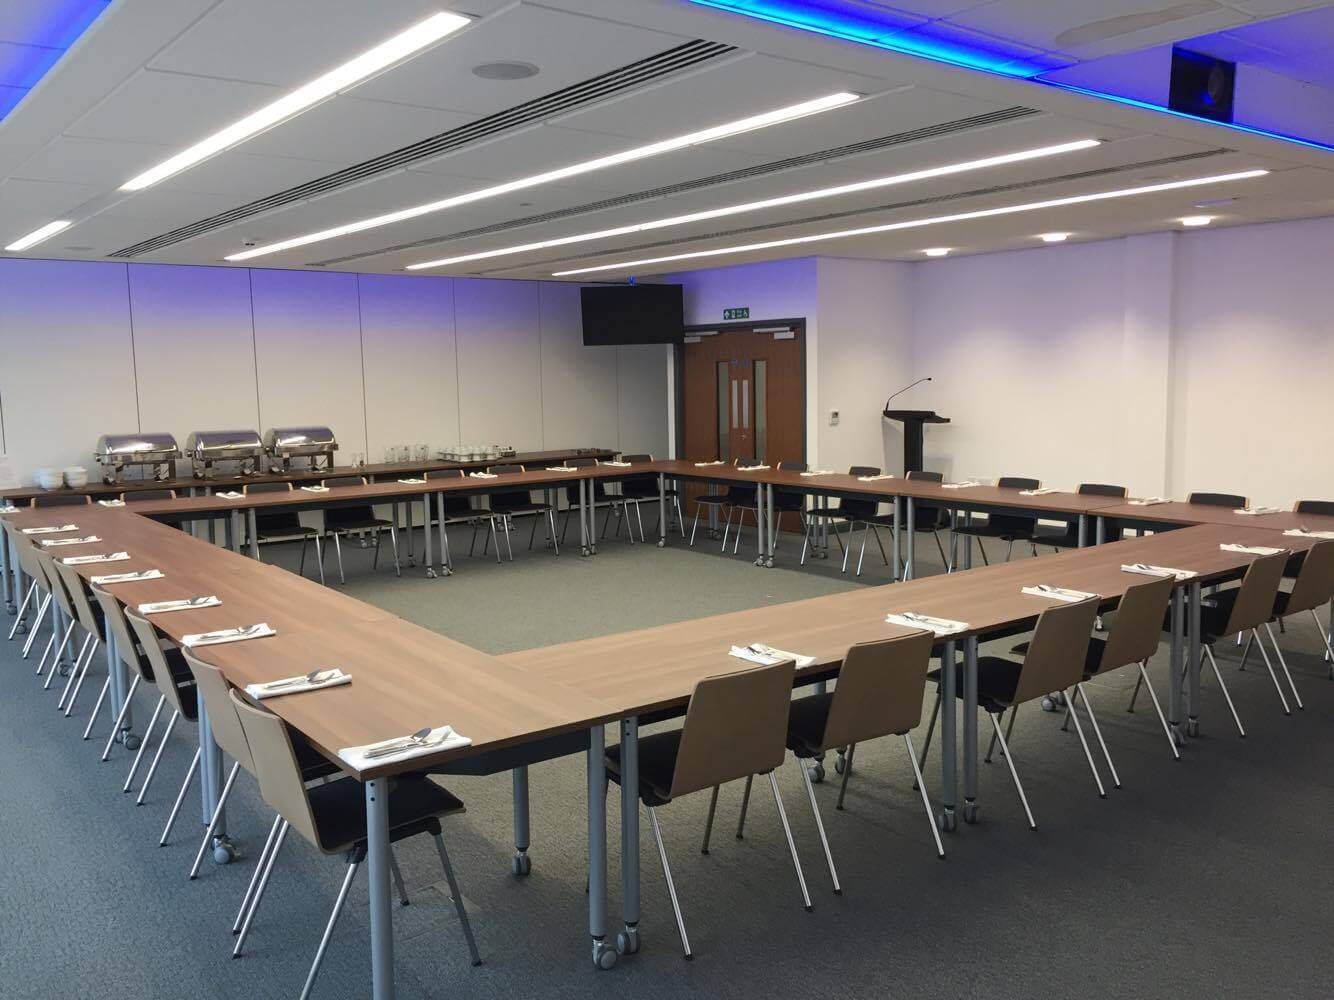 A single row of tables and chairs arranged in a square in a large meeting room